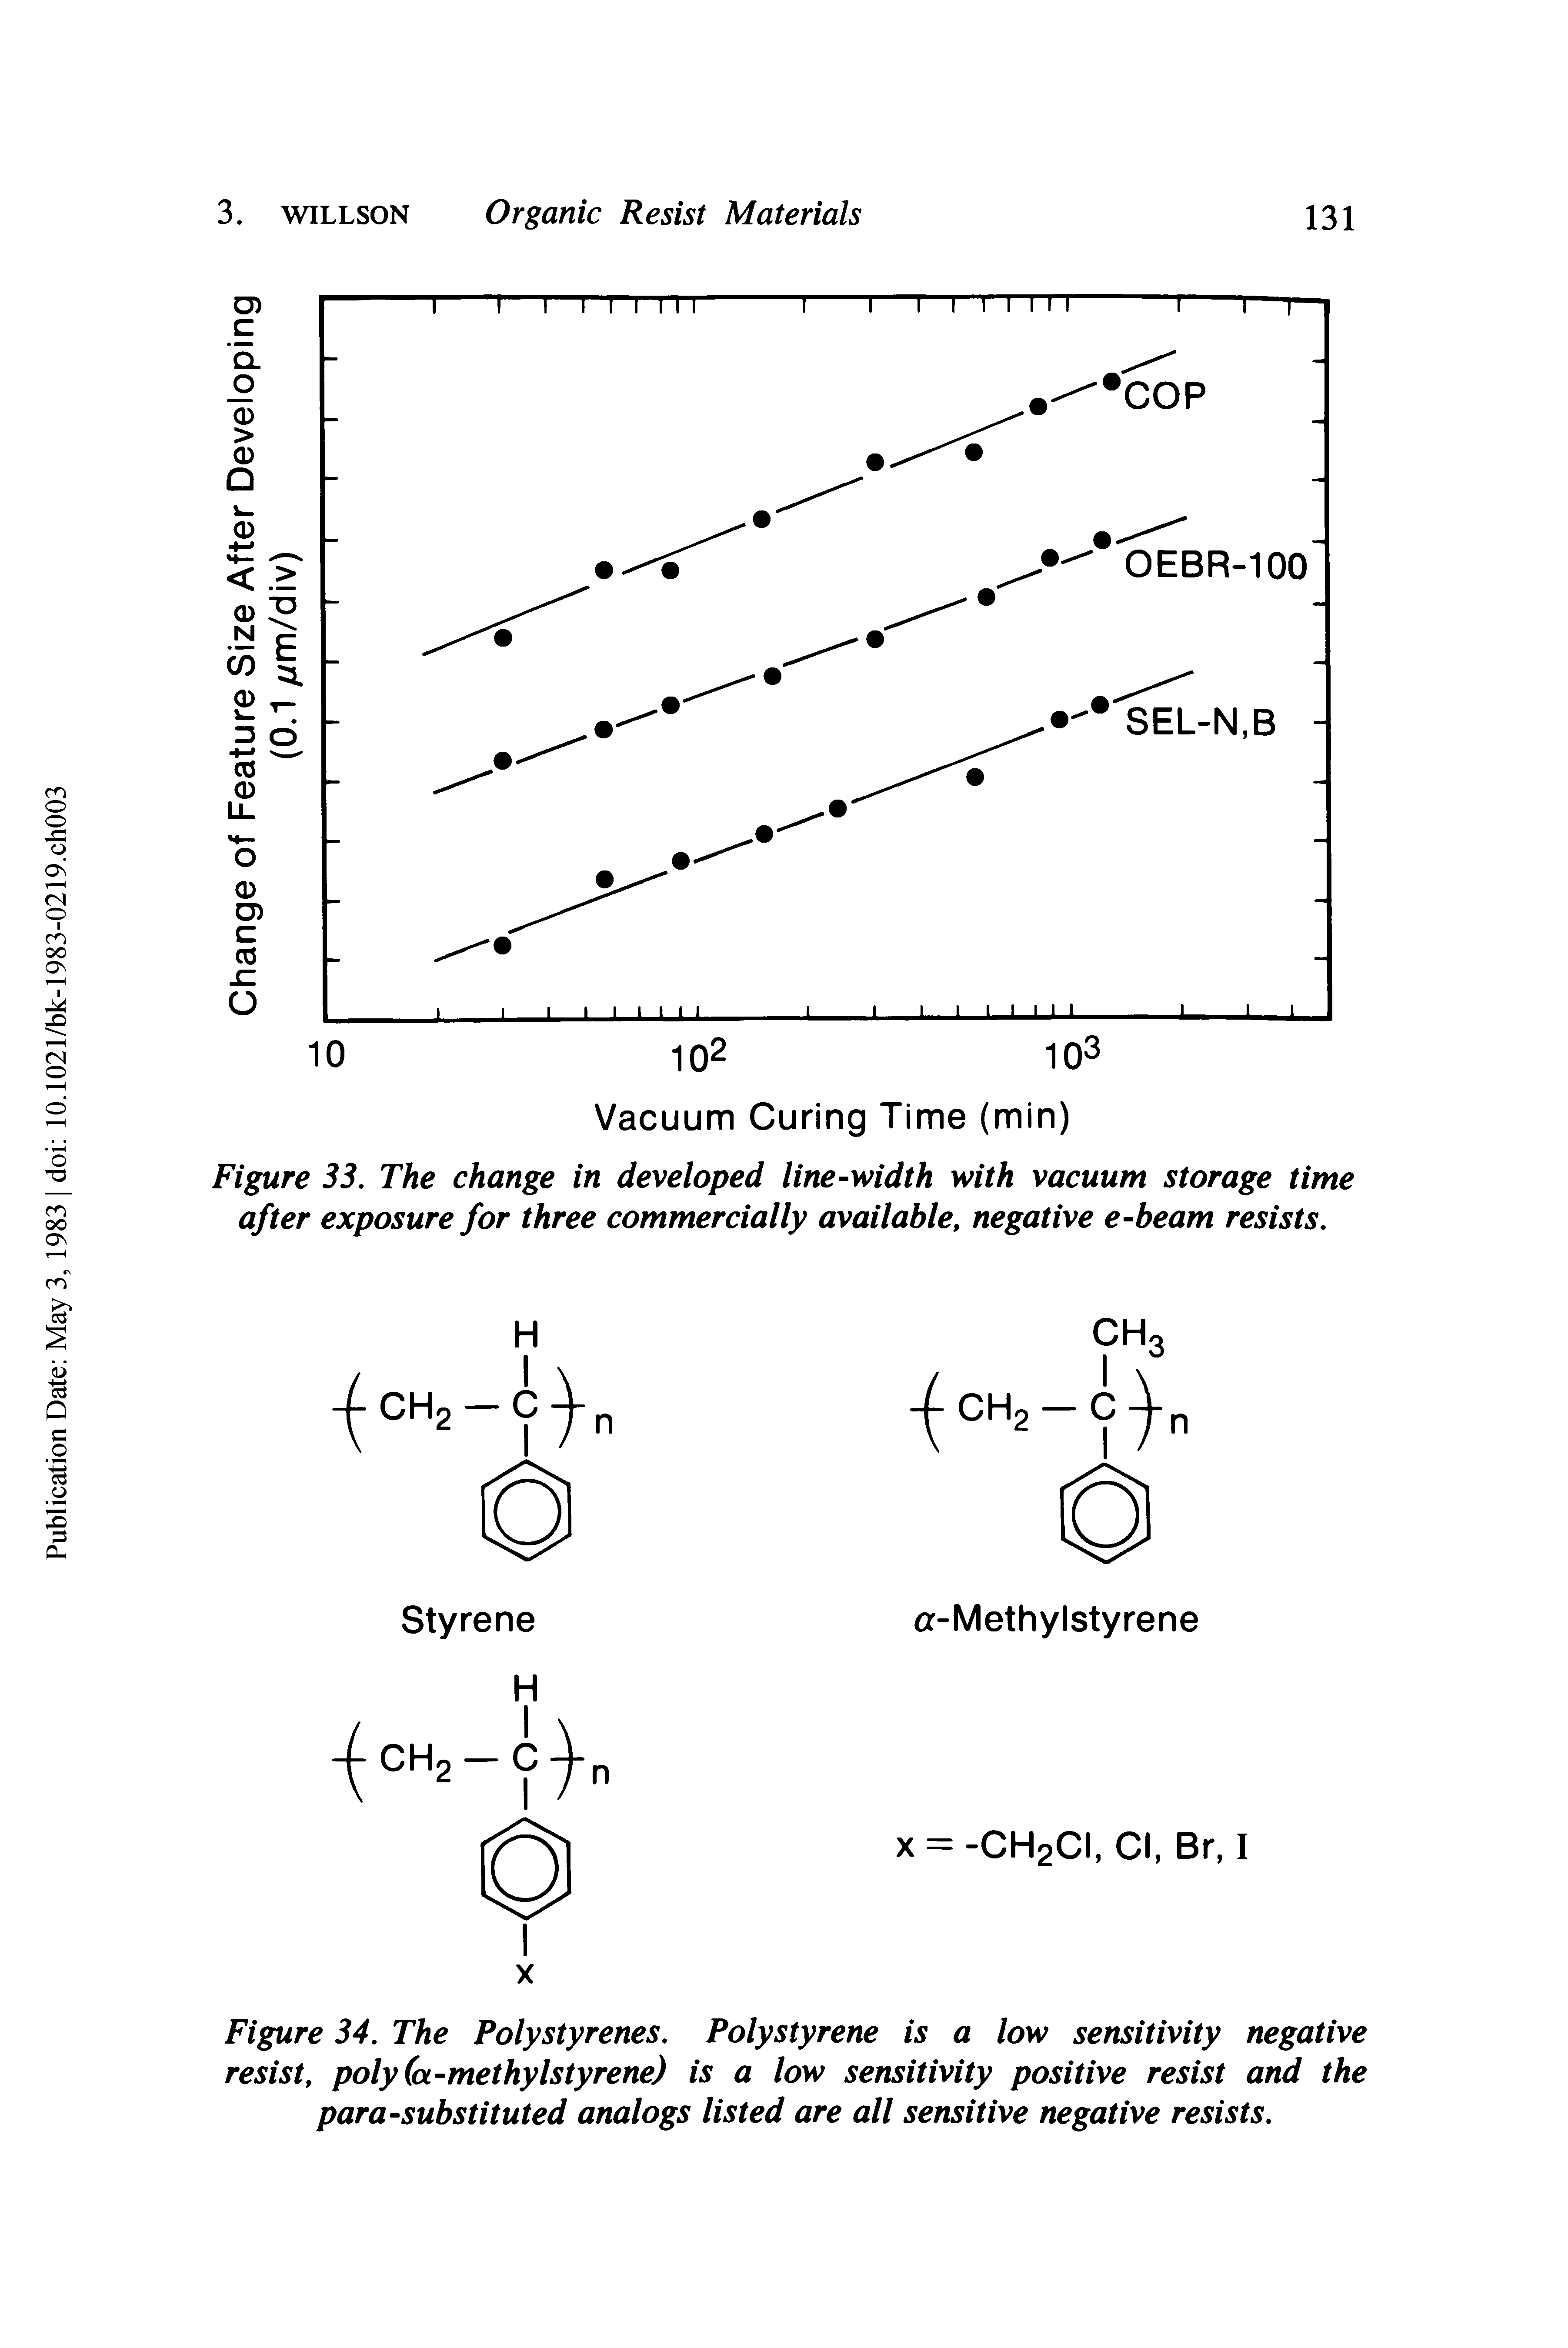 Figure 34. The Polystyrenes. Polystyrene is a low sensitivity negative resist, poly (a-methylstyrene) is a low sensitivity positive resist and the para-substituted analogs listed are all sensitive negative resists.